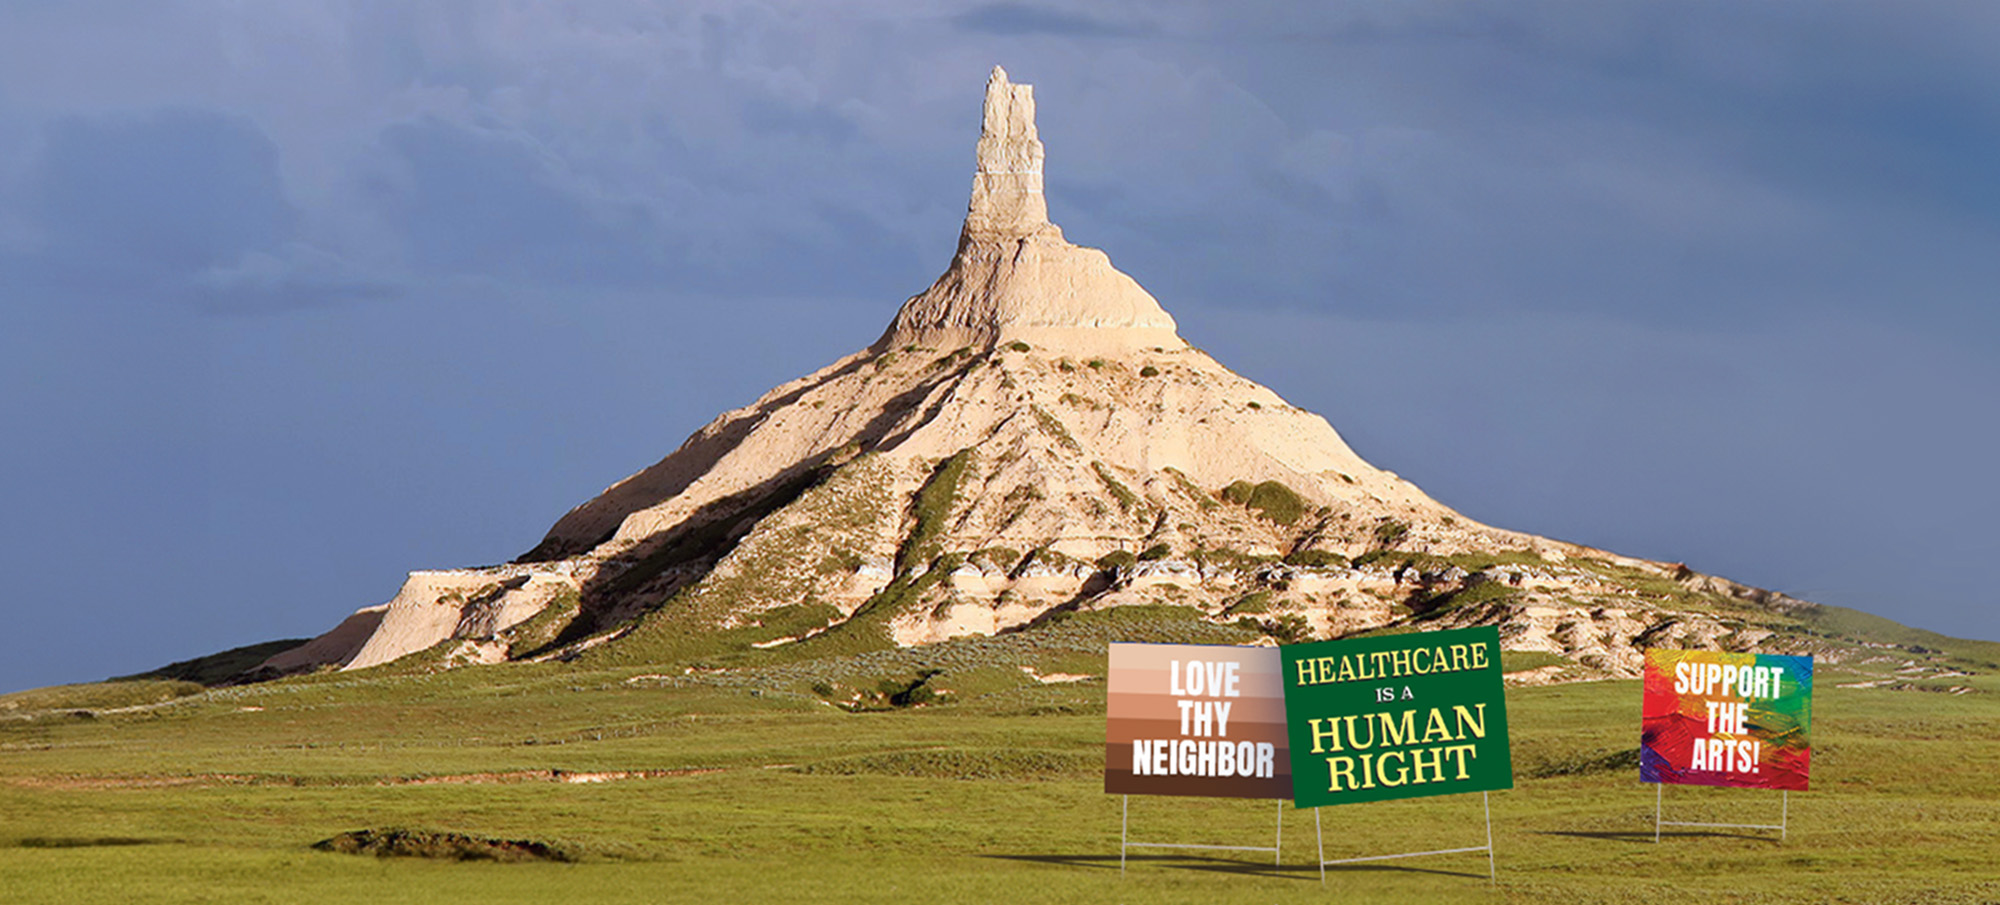 Chimney Rock in Nebraska with yard signs celebrating "Love They Neighbor," "Healthcare is a Human Right" and "Support the Arts"